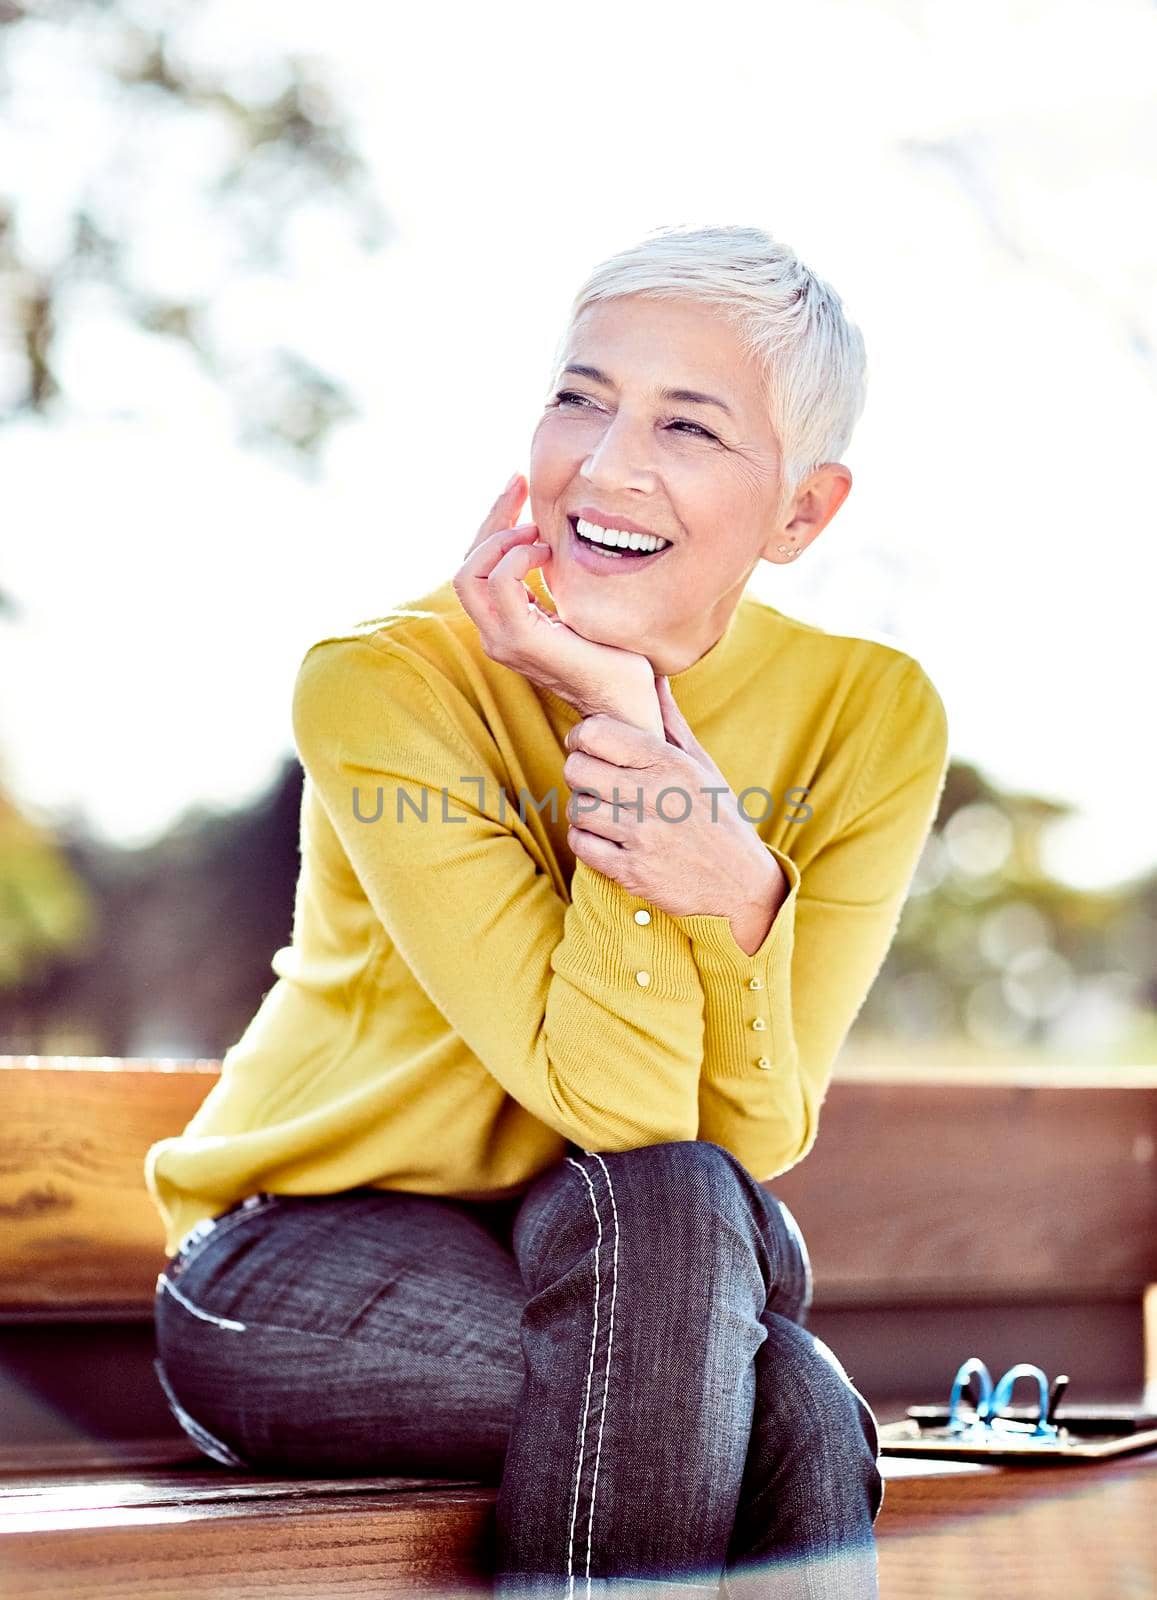 portrait of a happy smiling senior woman with grey hair outdoors